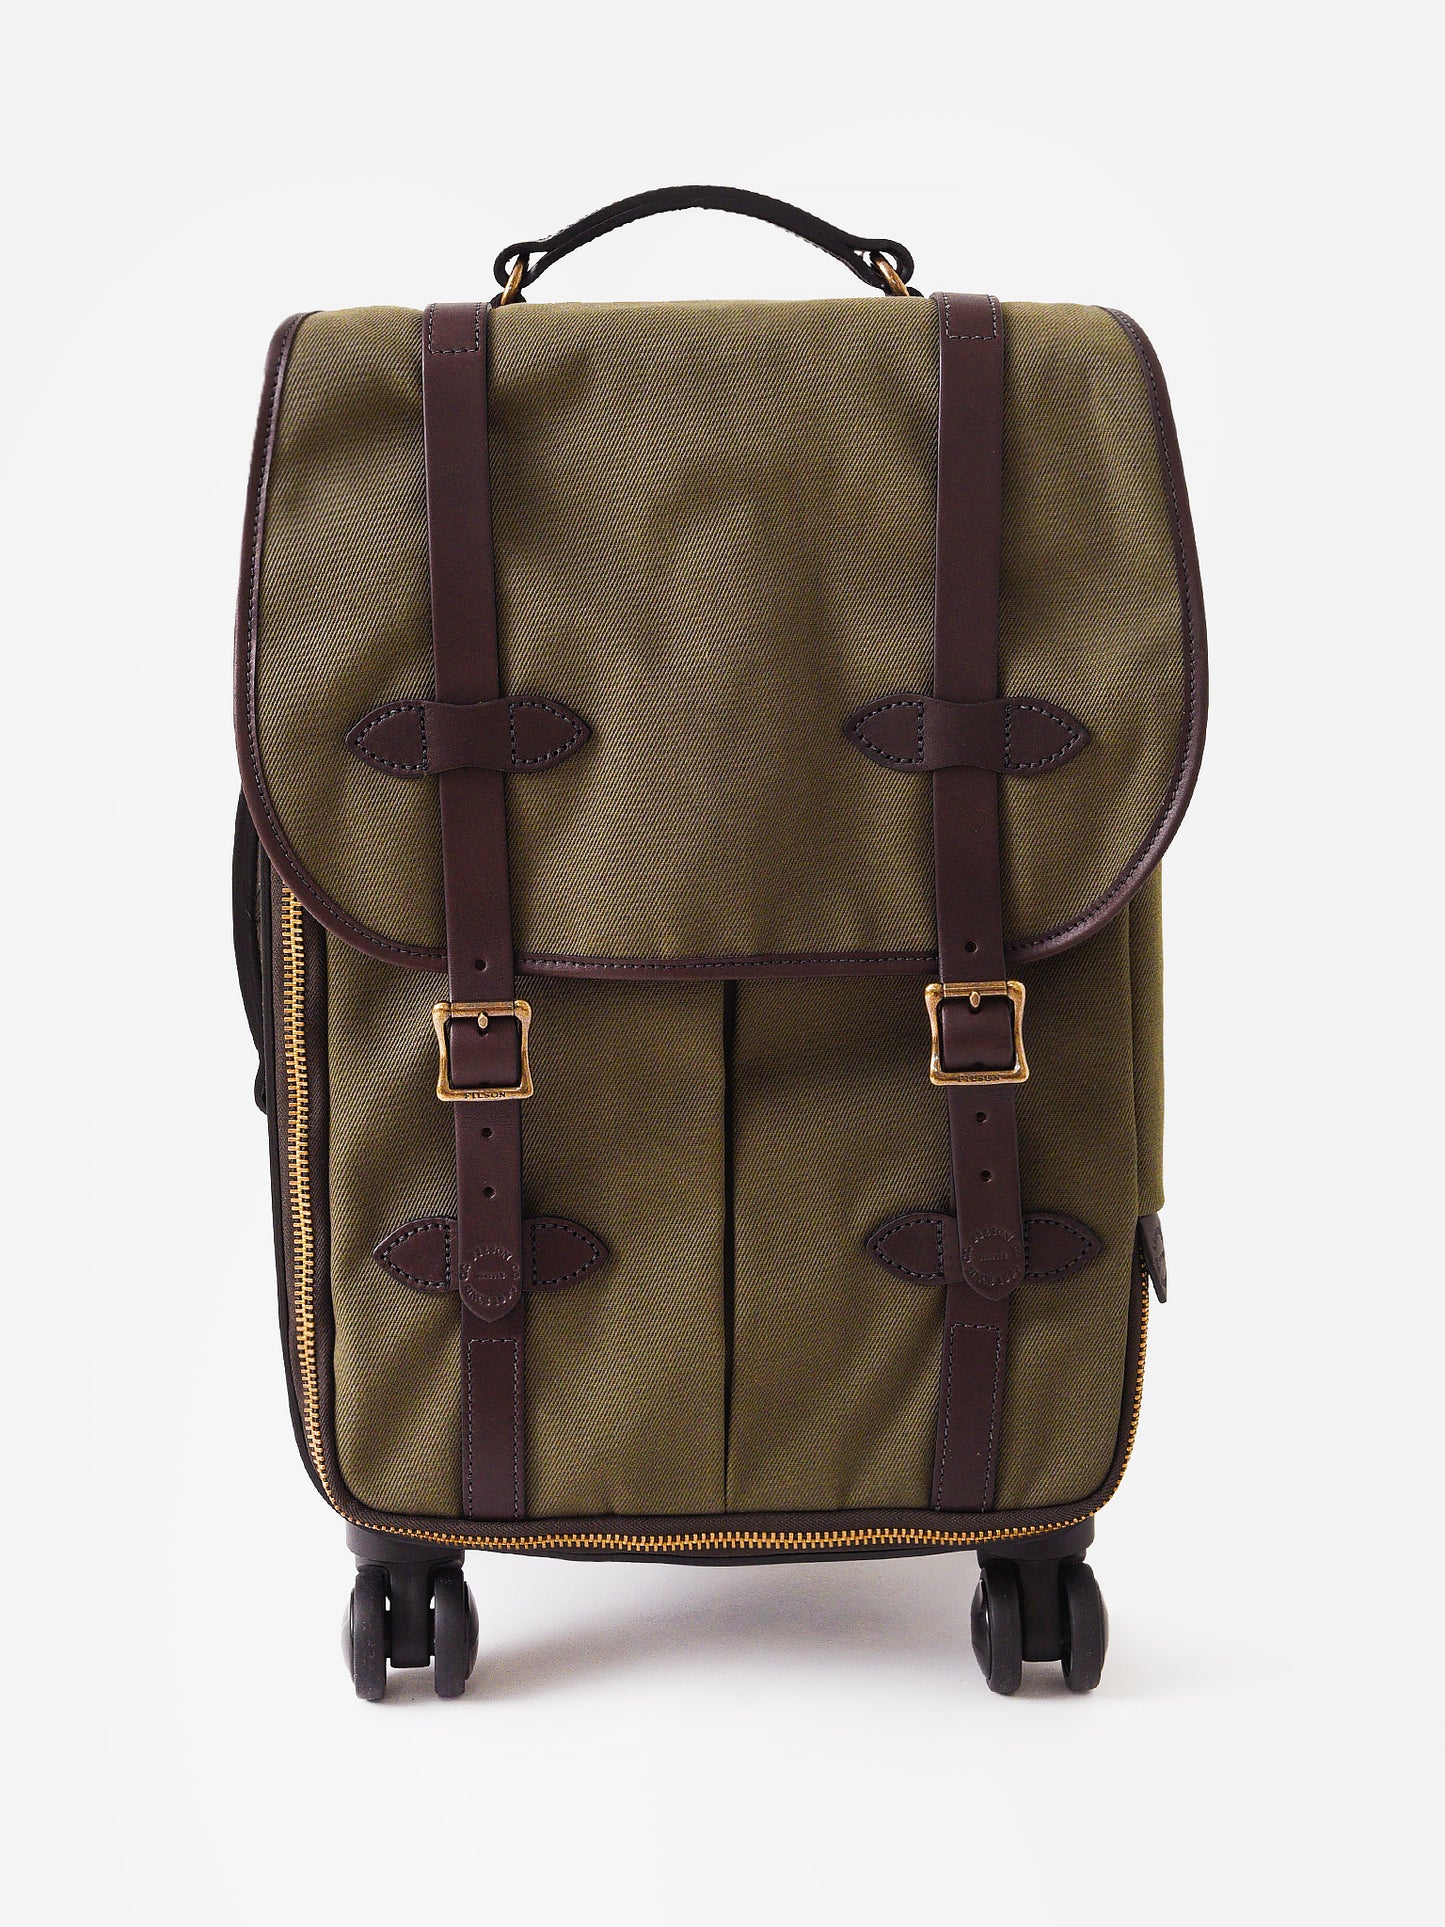 Filson Rugged Twill Rolling 4-Wheel Carry-On Bag